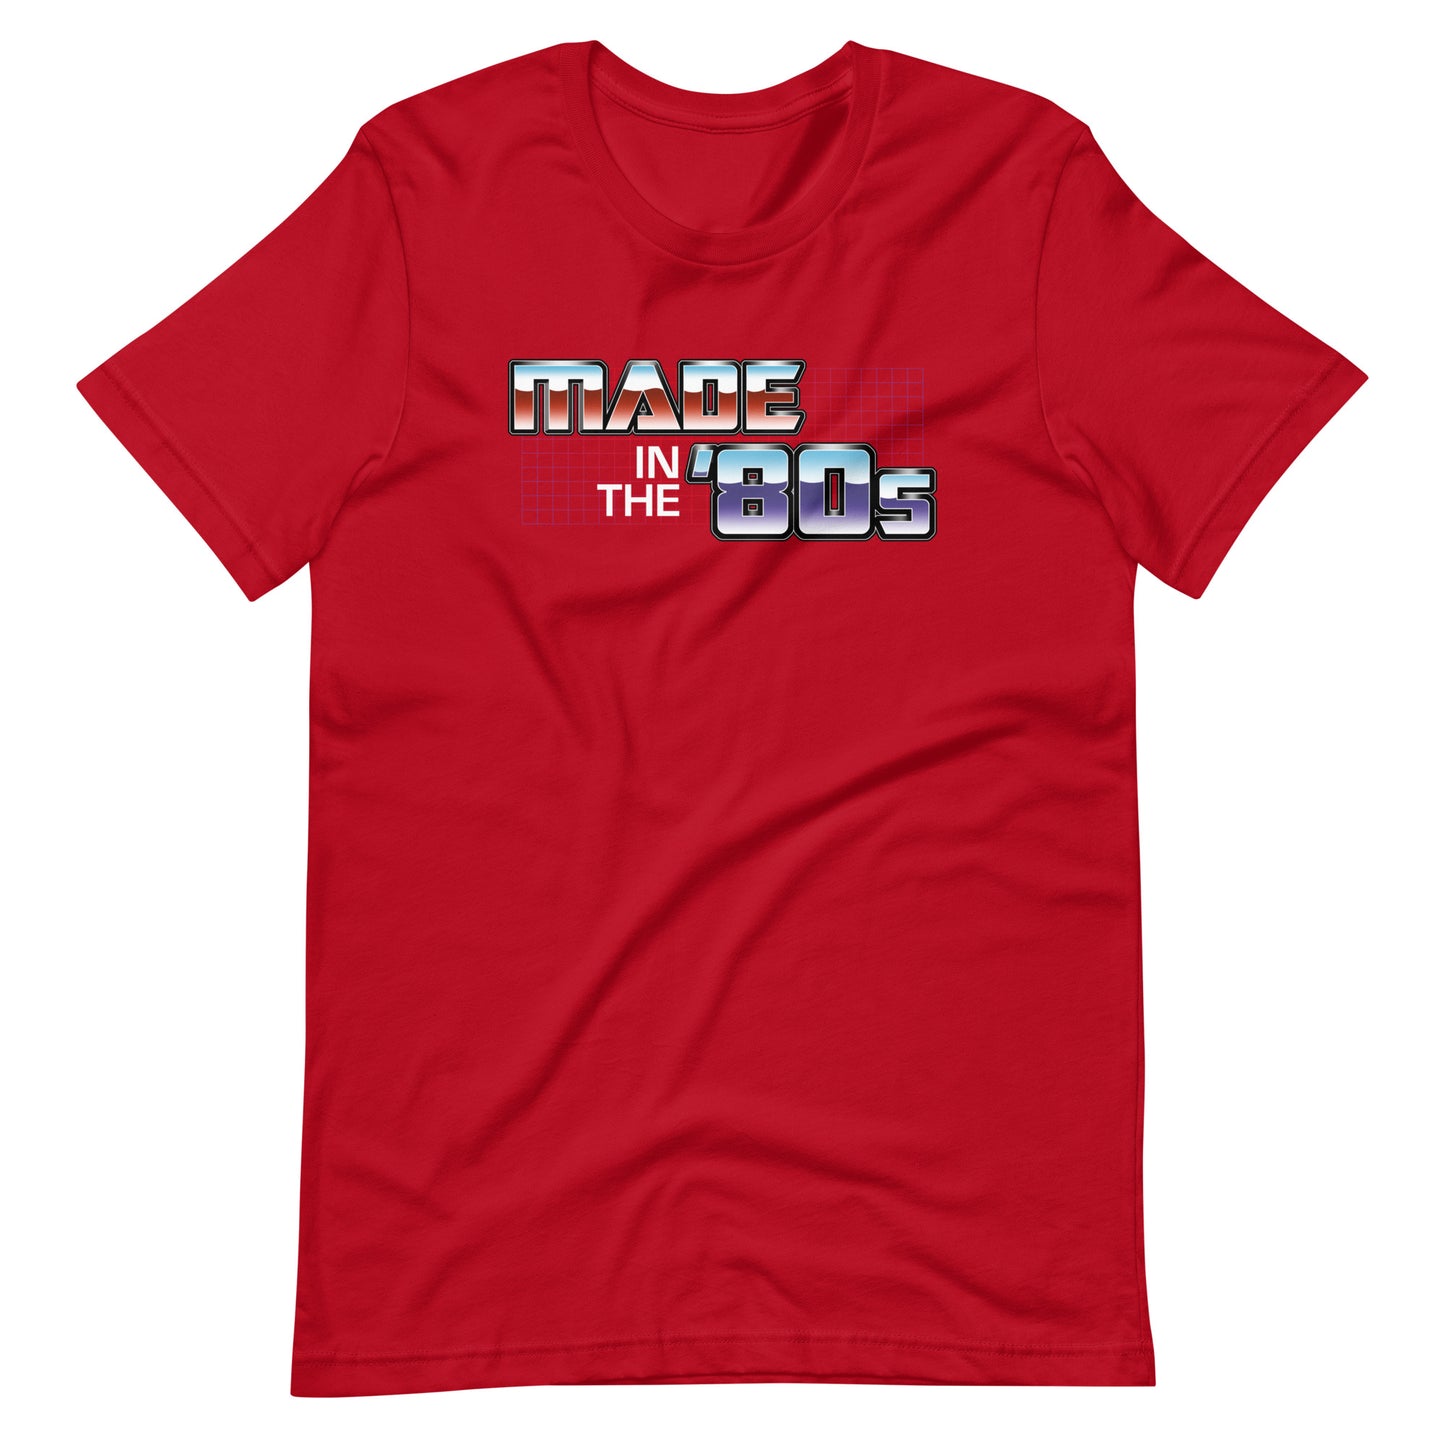 Made in the '80s TF t-shirt